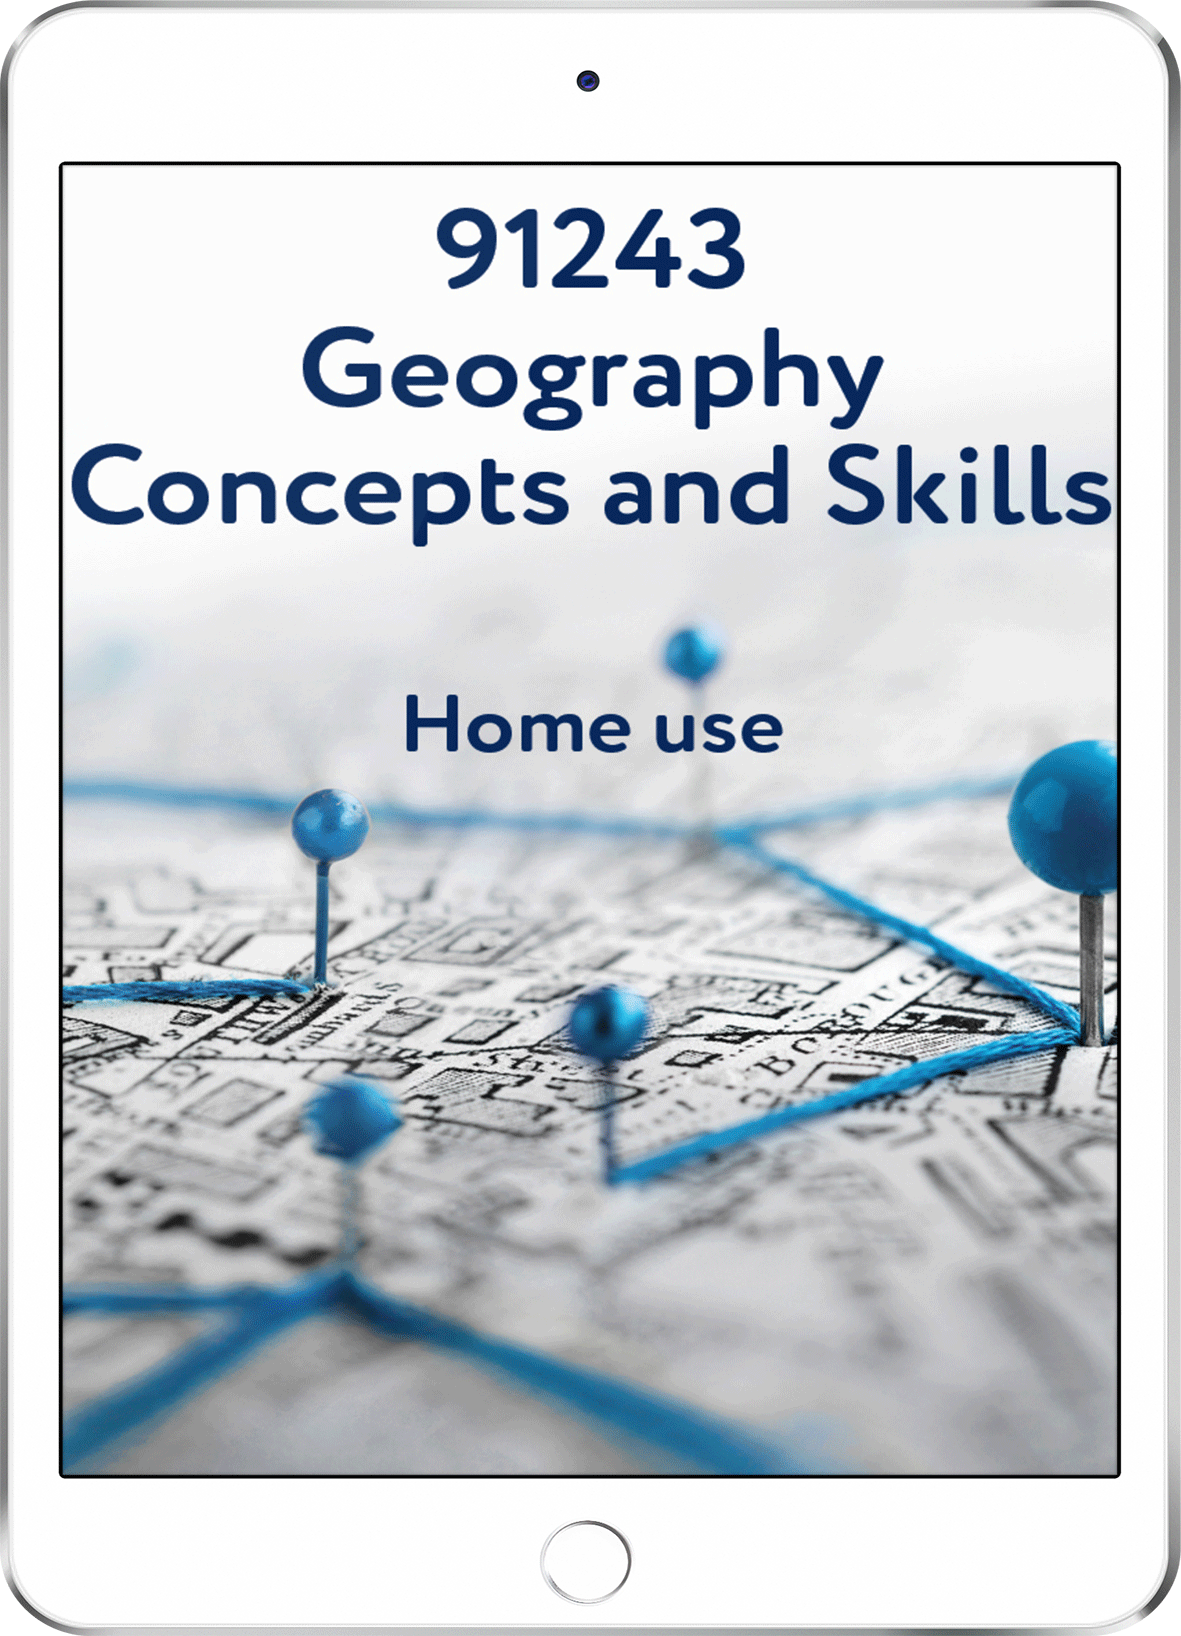 91243 Geography Concepts and Skills - Home Use